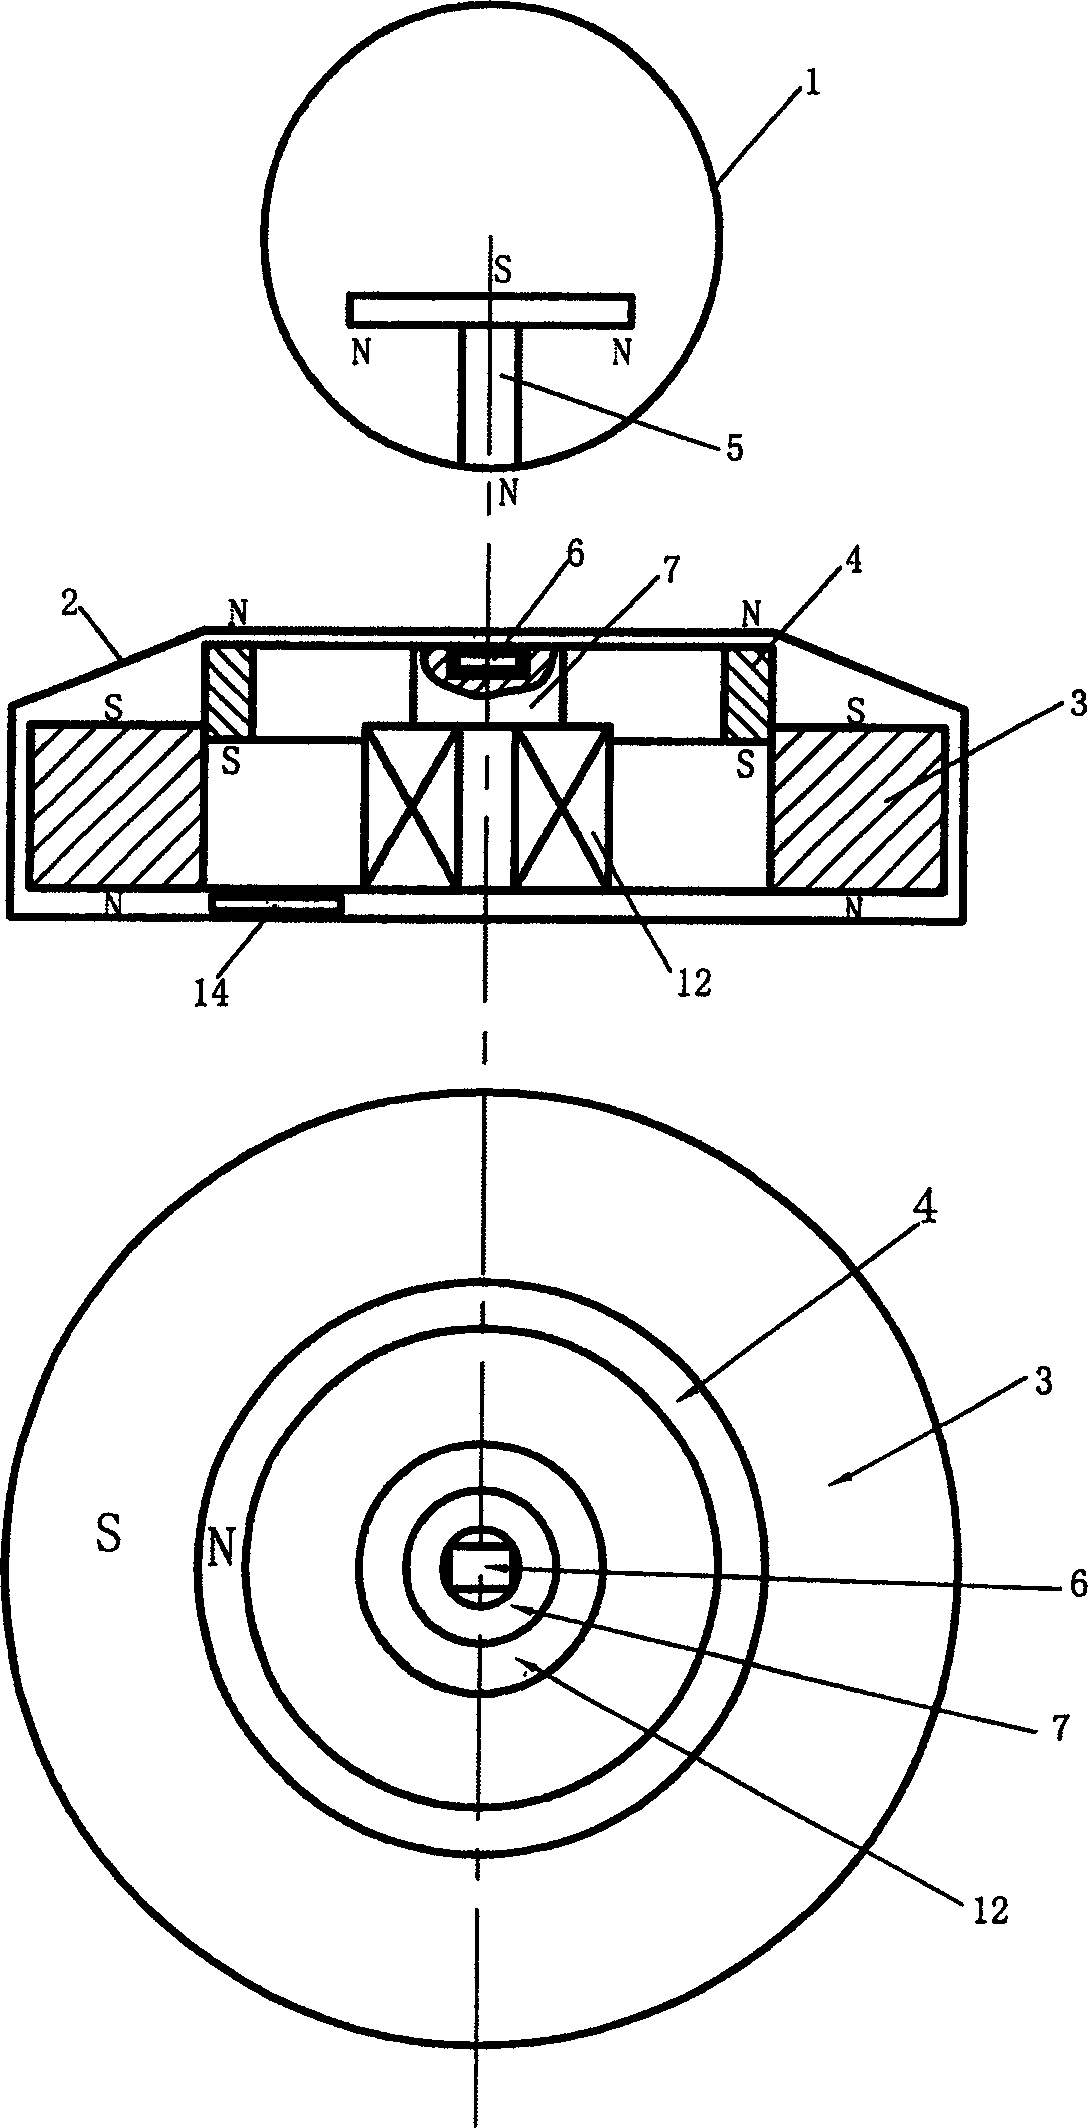 Repulsive levitation device with vertical mobile control mechanism